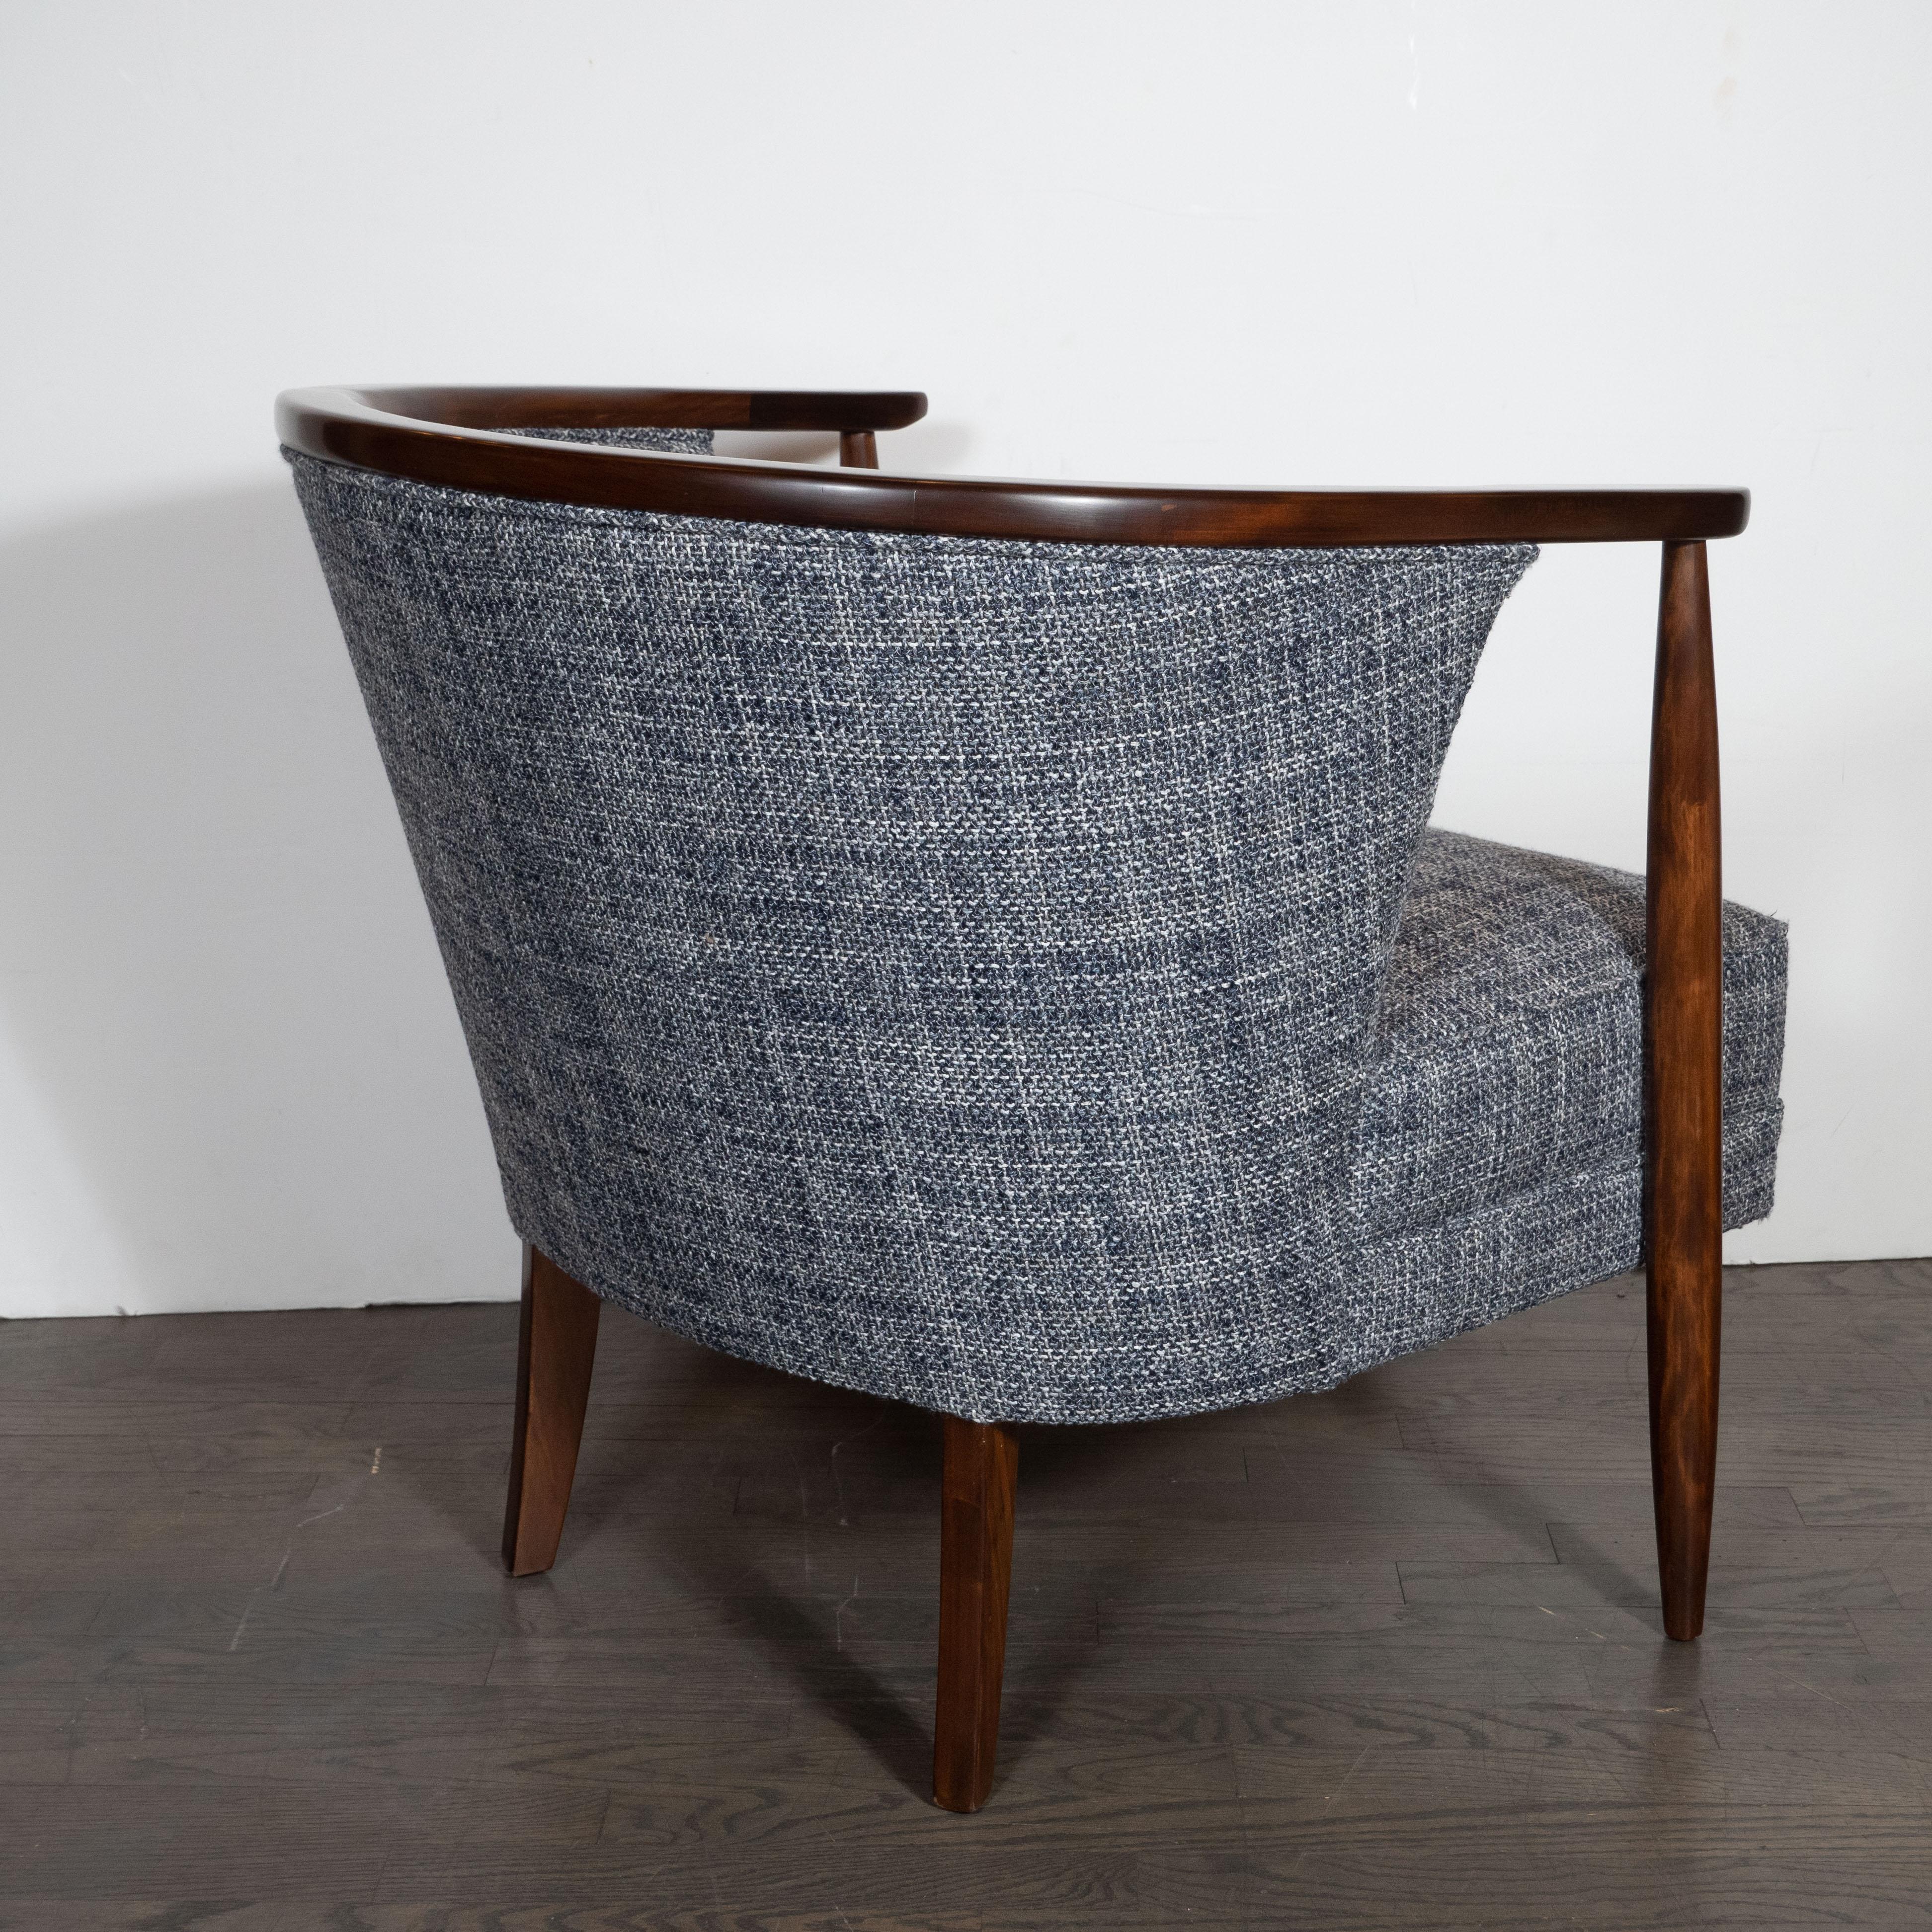 Mid-20th Century Midcentury Barrel Back Chairs in Handrubbed Walnut with Rectilinear Upholstery